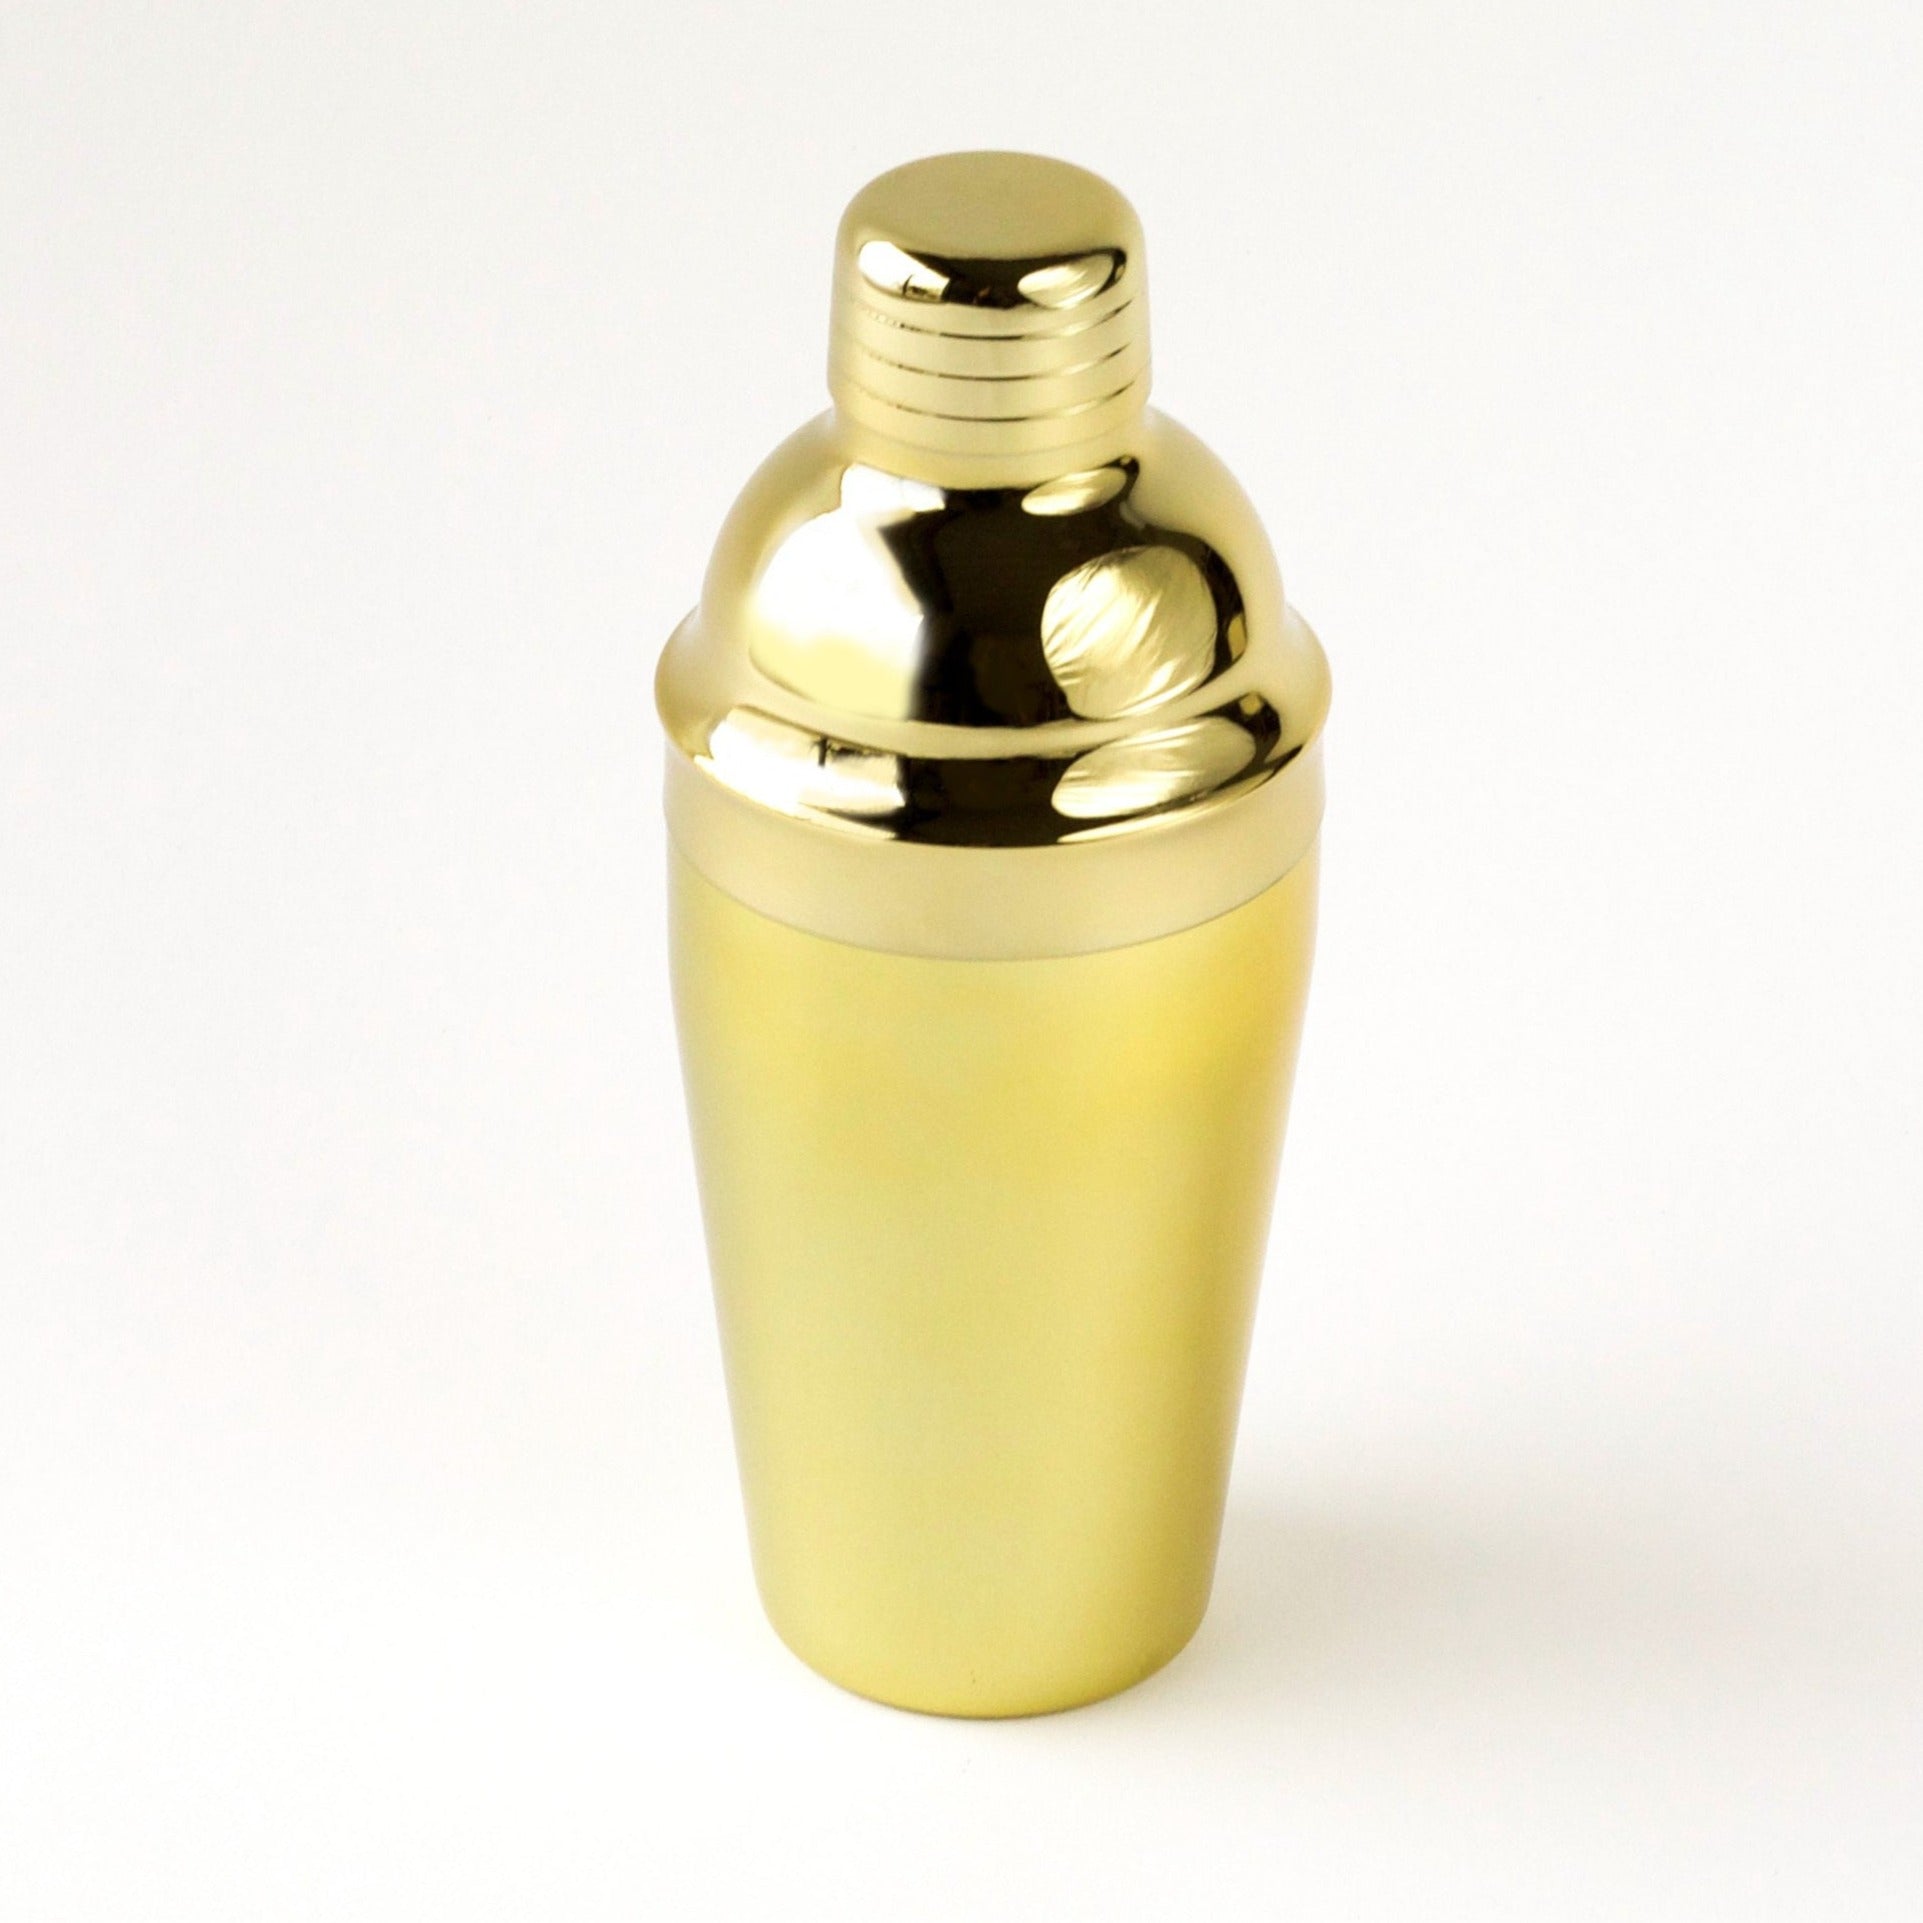 A gold cocktail shaker sitting on a white background.